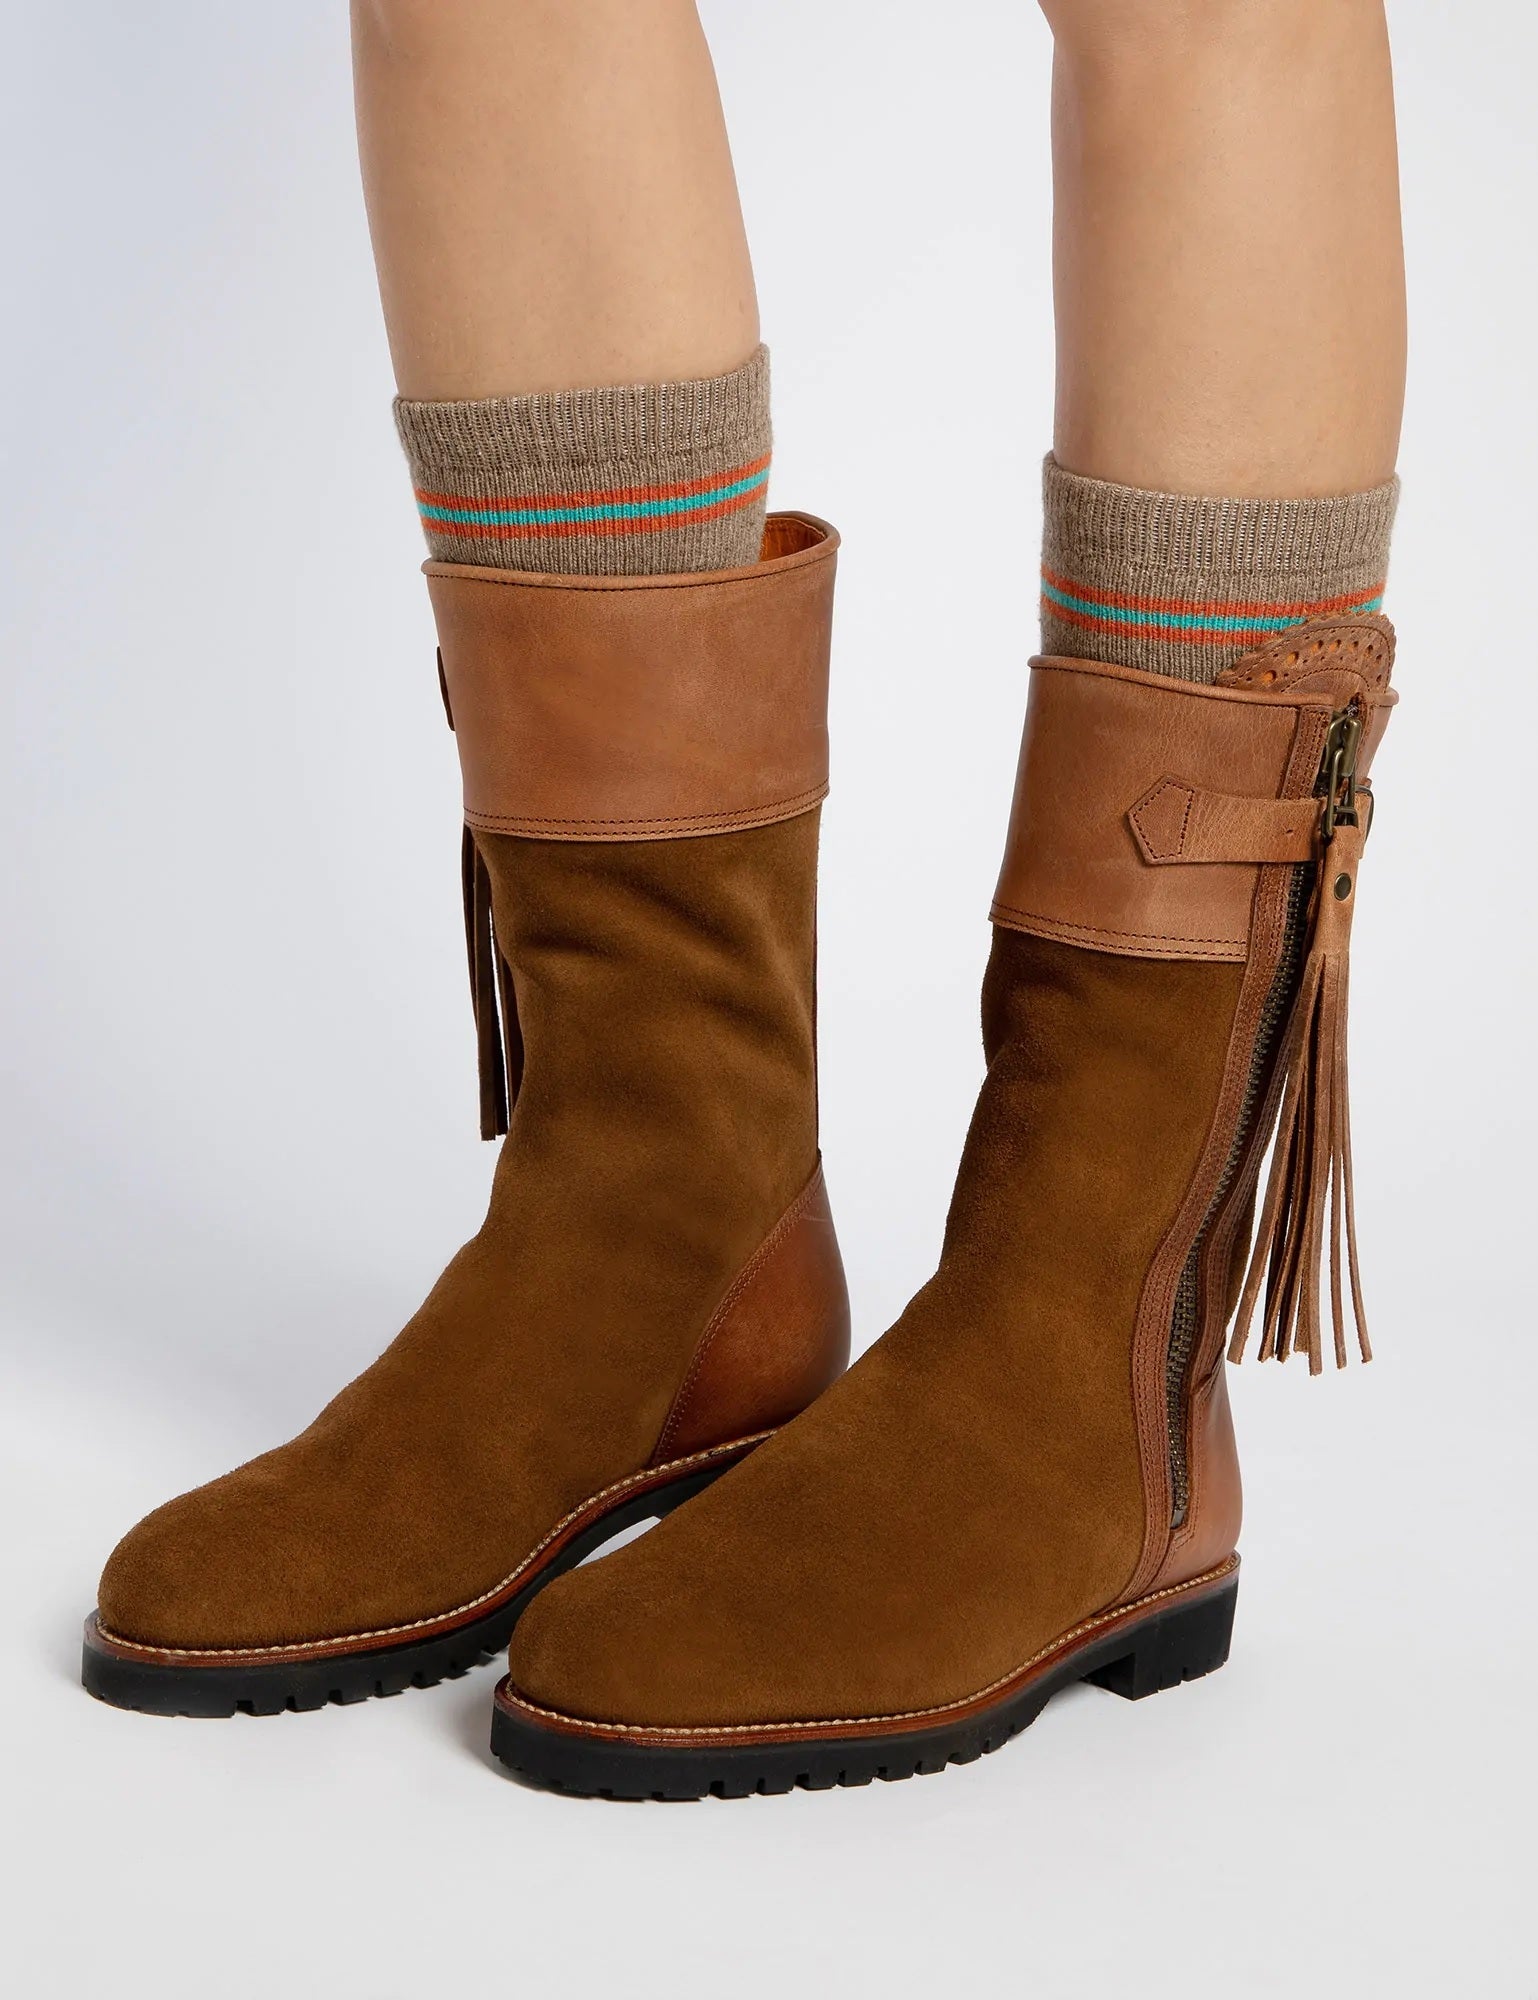 PENELOPE CHILVERS Inclement Midcalf Tassel Boots - Womens Waterproof Suede – Tan